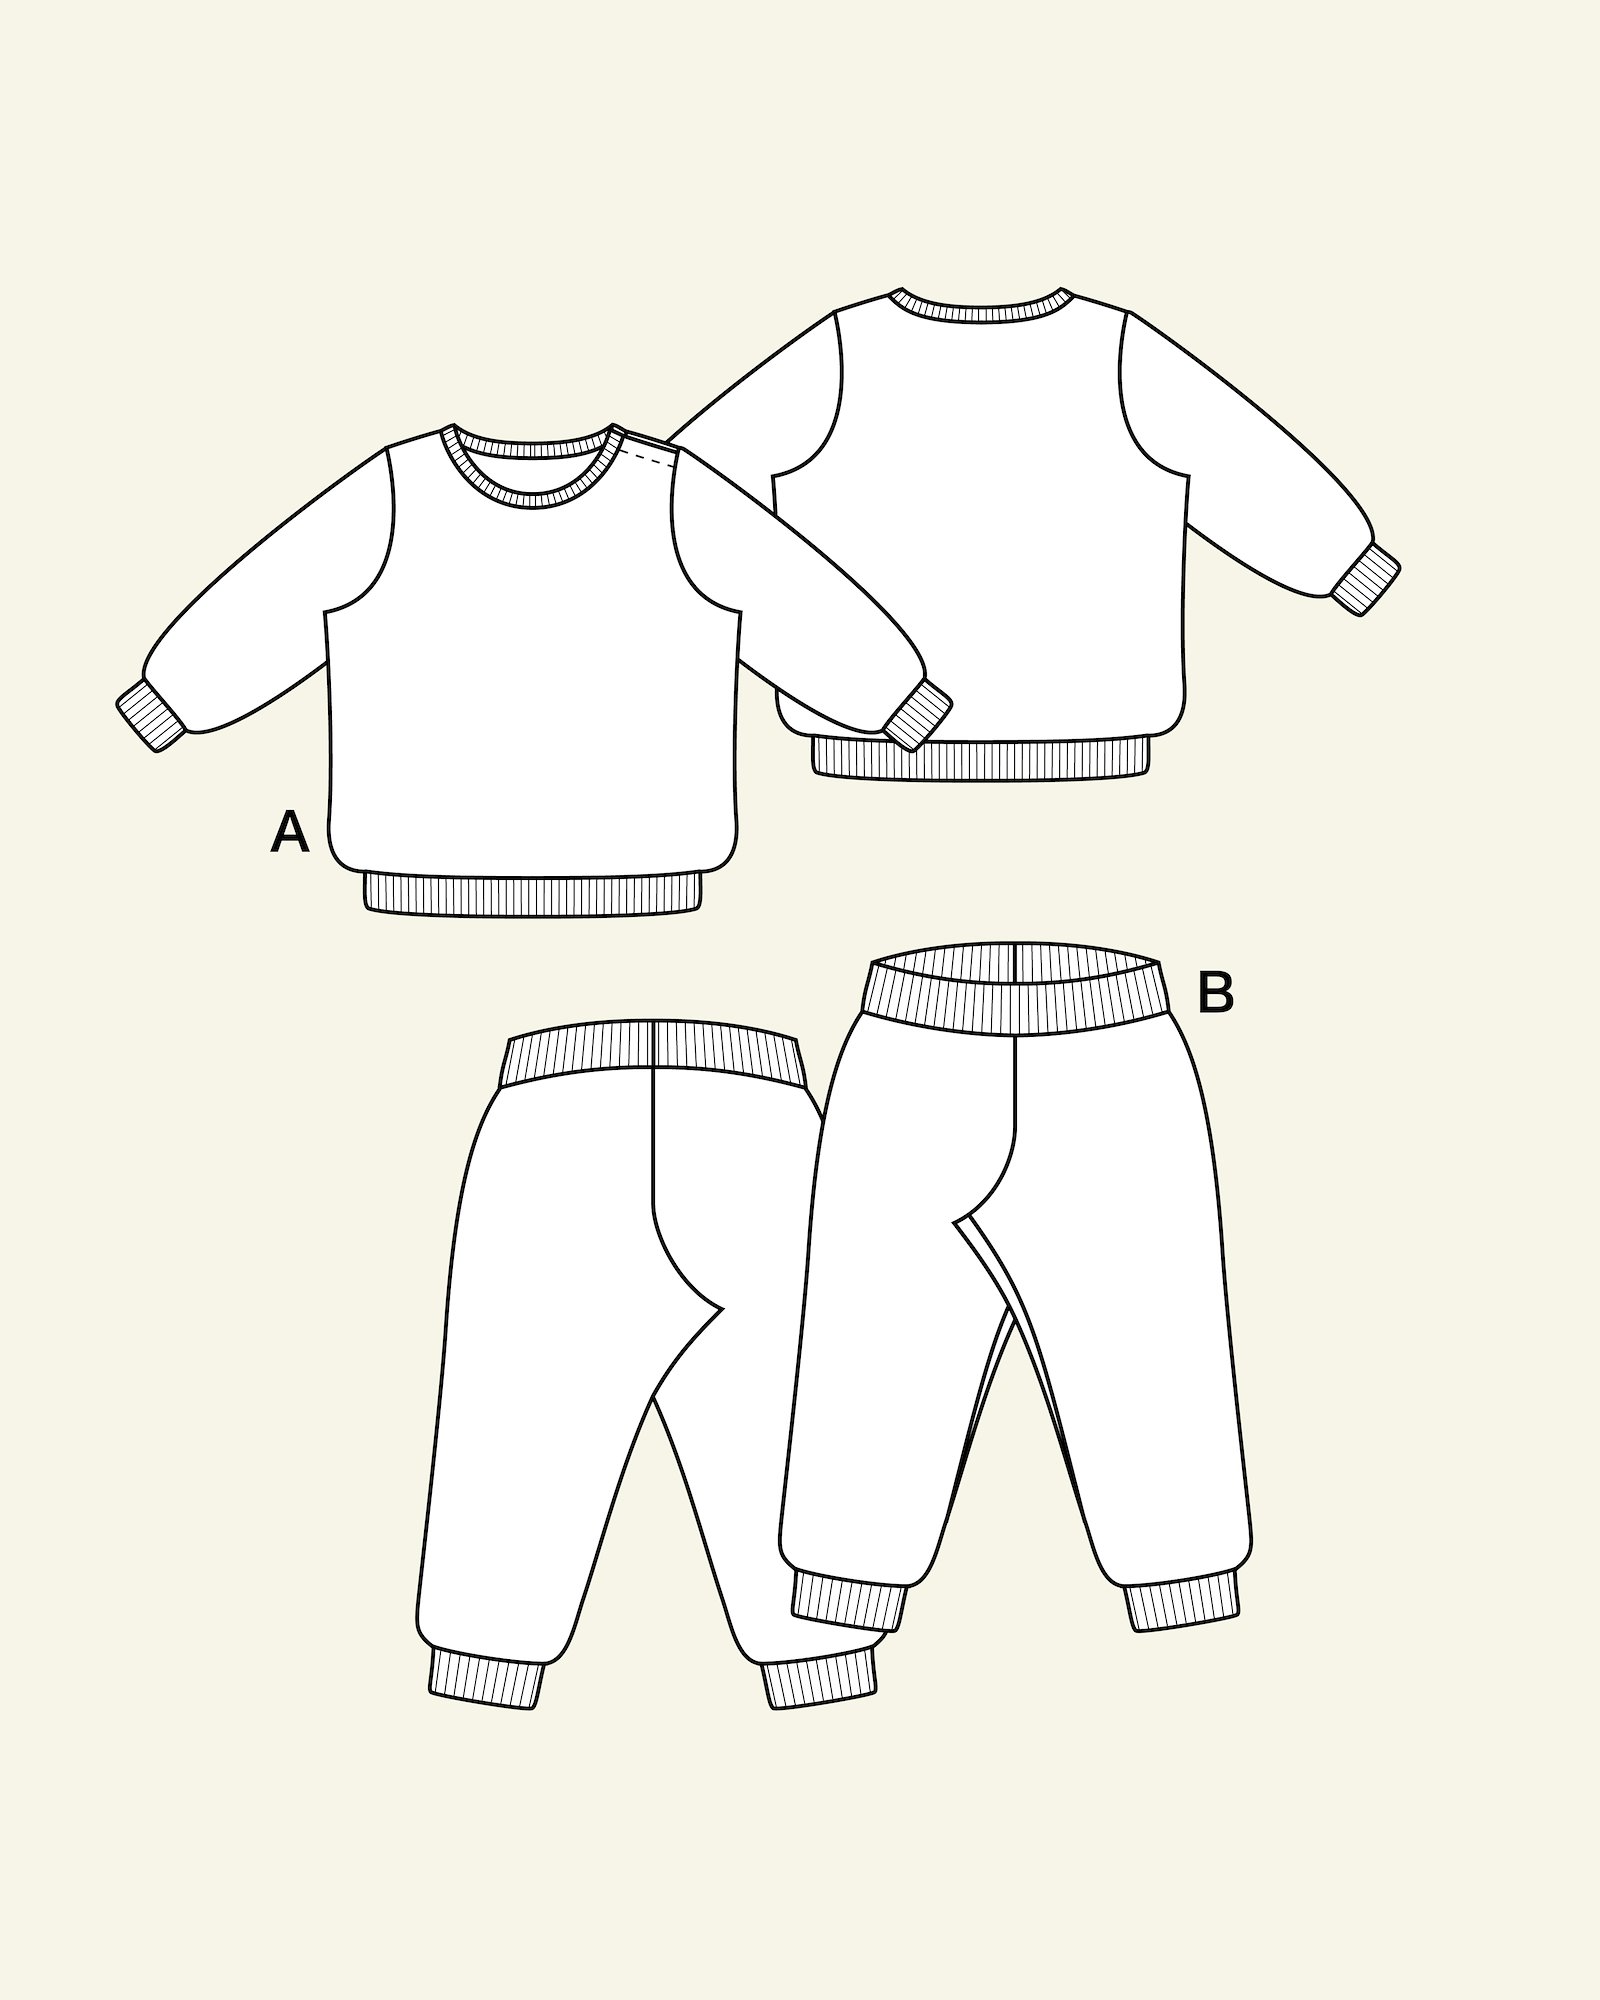 Baby joggedress 81033, 62 p81033_pack